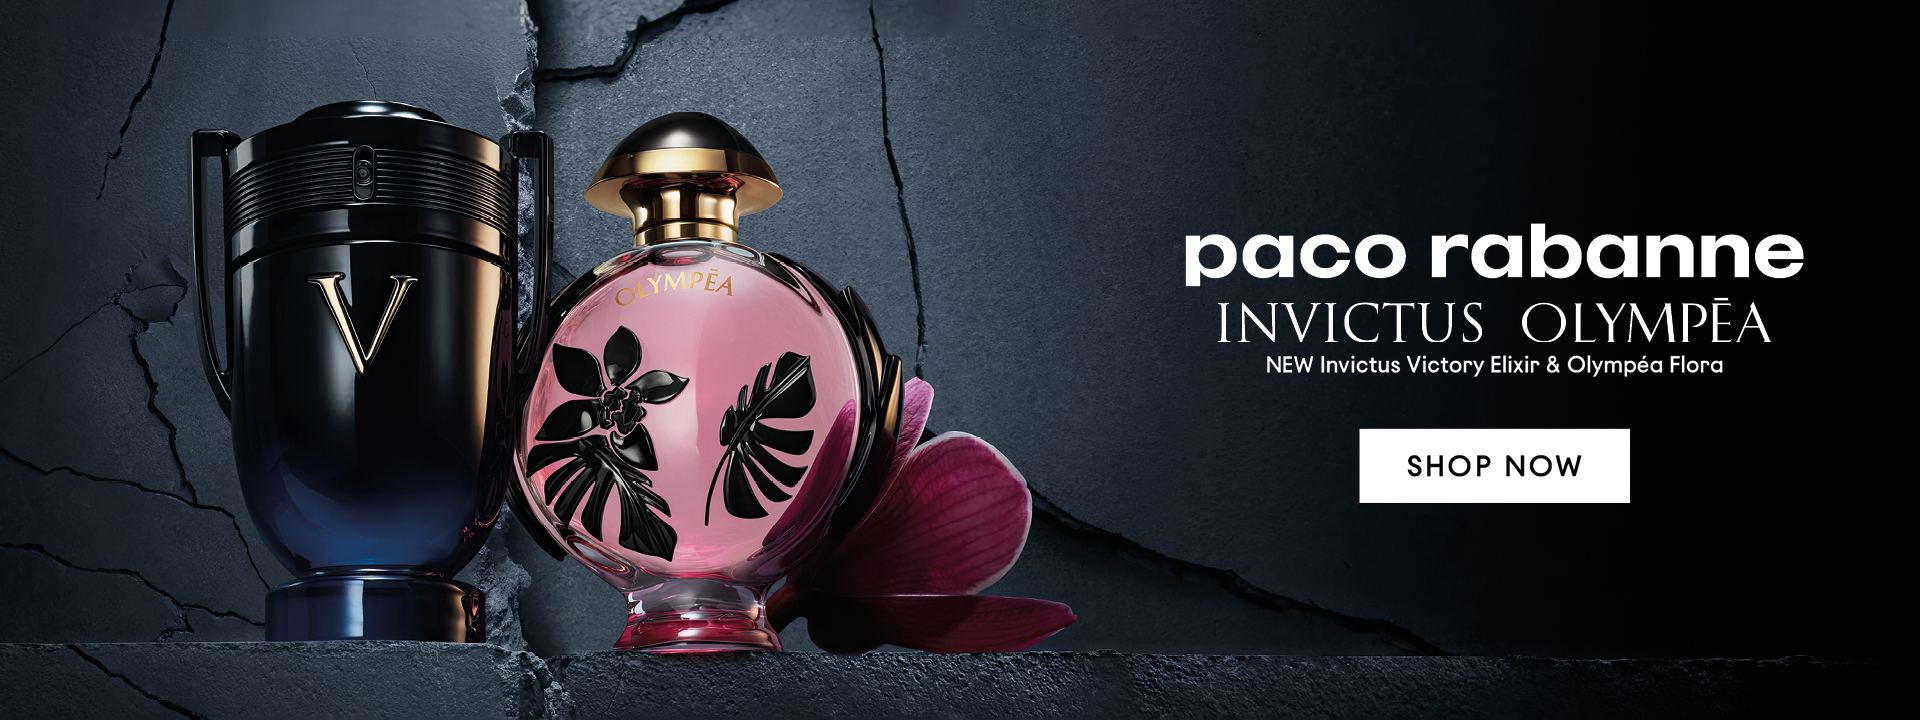 PACO RABANNE OLYMPEA FLORA AND INVICTUS VICTORY ELIXIR